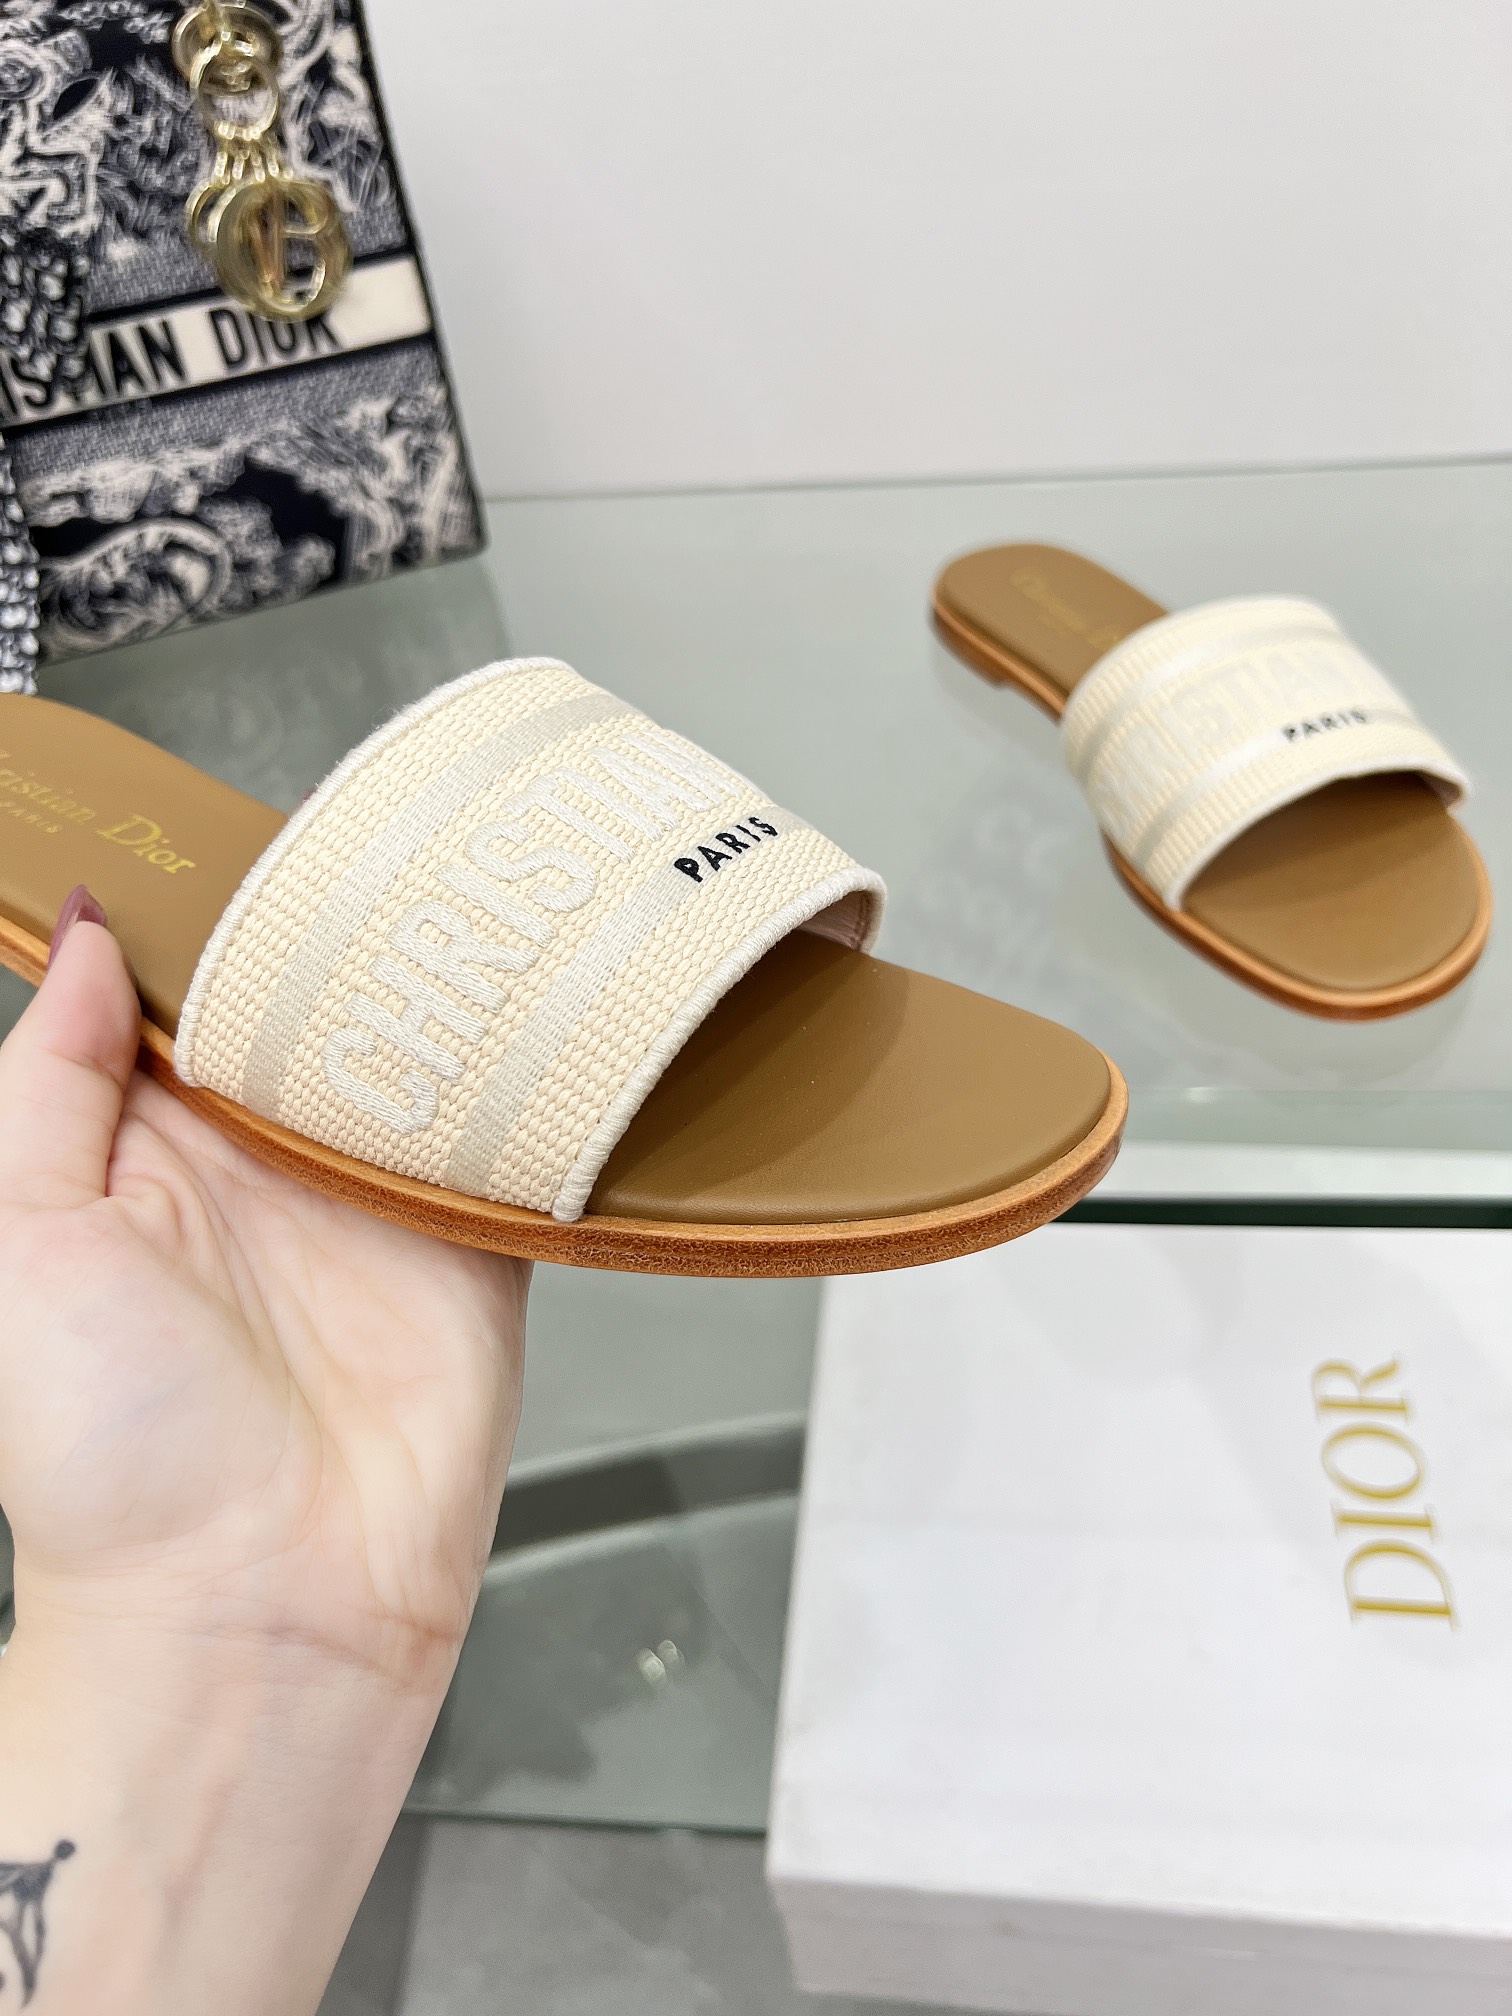 Dior Shoes Slippers Pink Embroidery Calfskin Cotton Cowhide Genuine Leather Fall Collection Fashion Casual